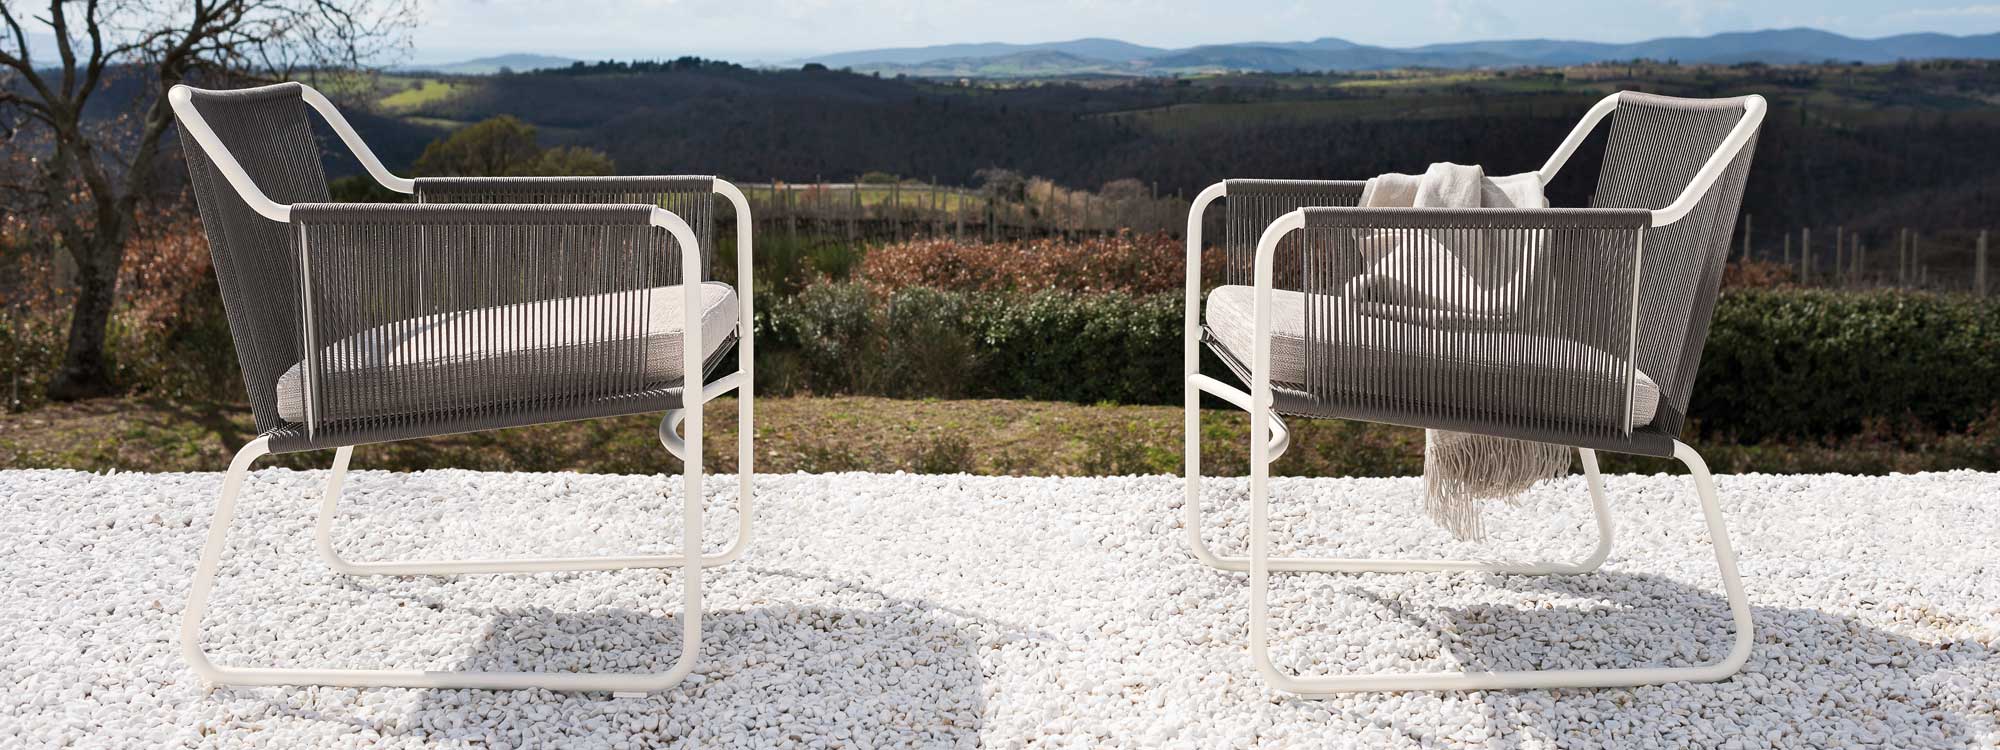 Pair of Harp modern garden lounge chairs on white gravel with Tuscan landscape behind